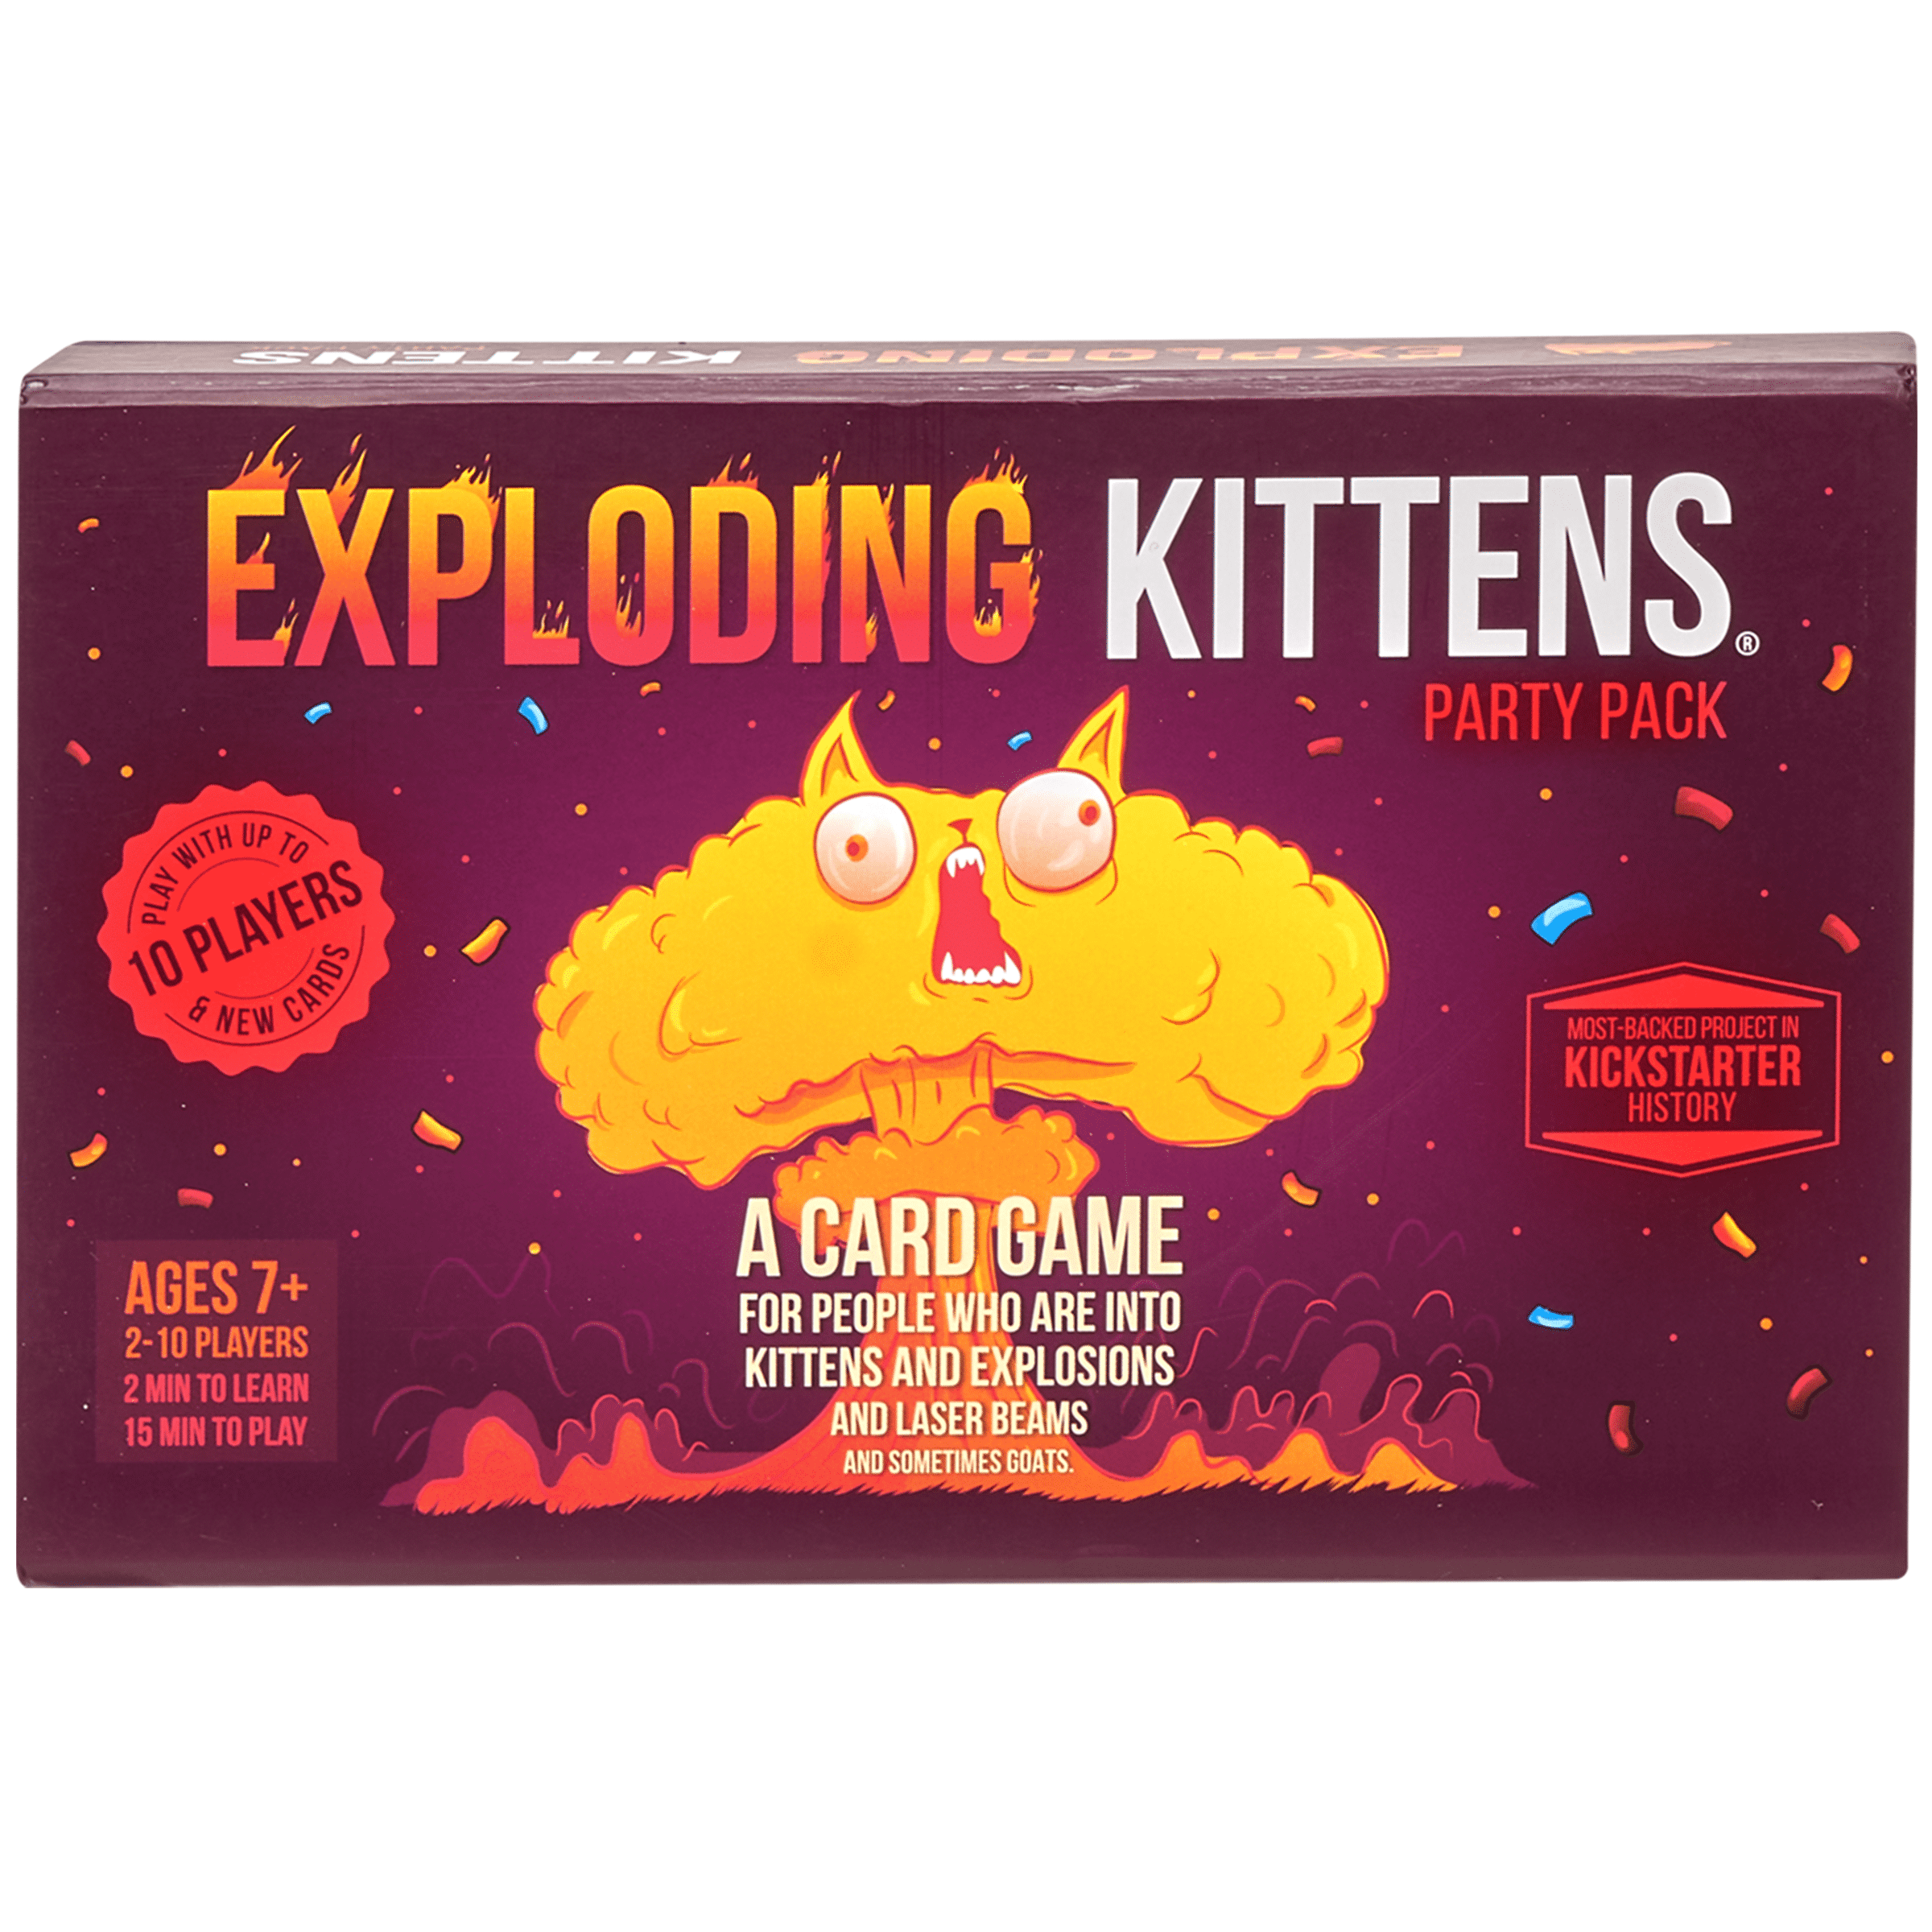 Exploding Kittens Party Pack Edition - a party game for up to 10 Players